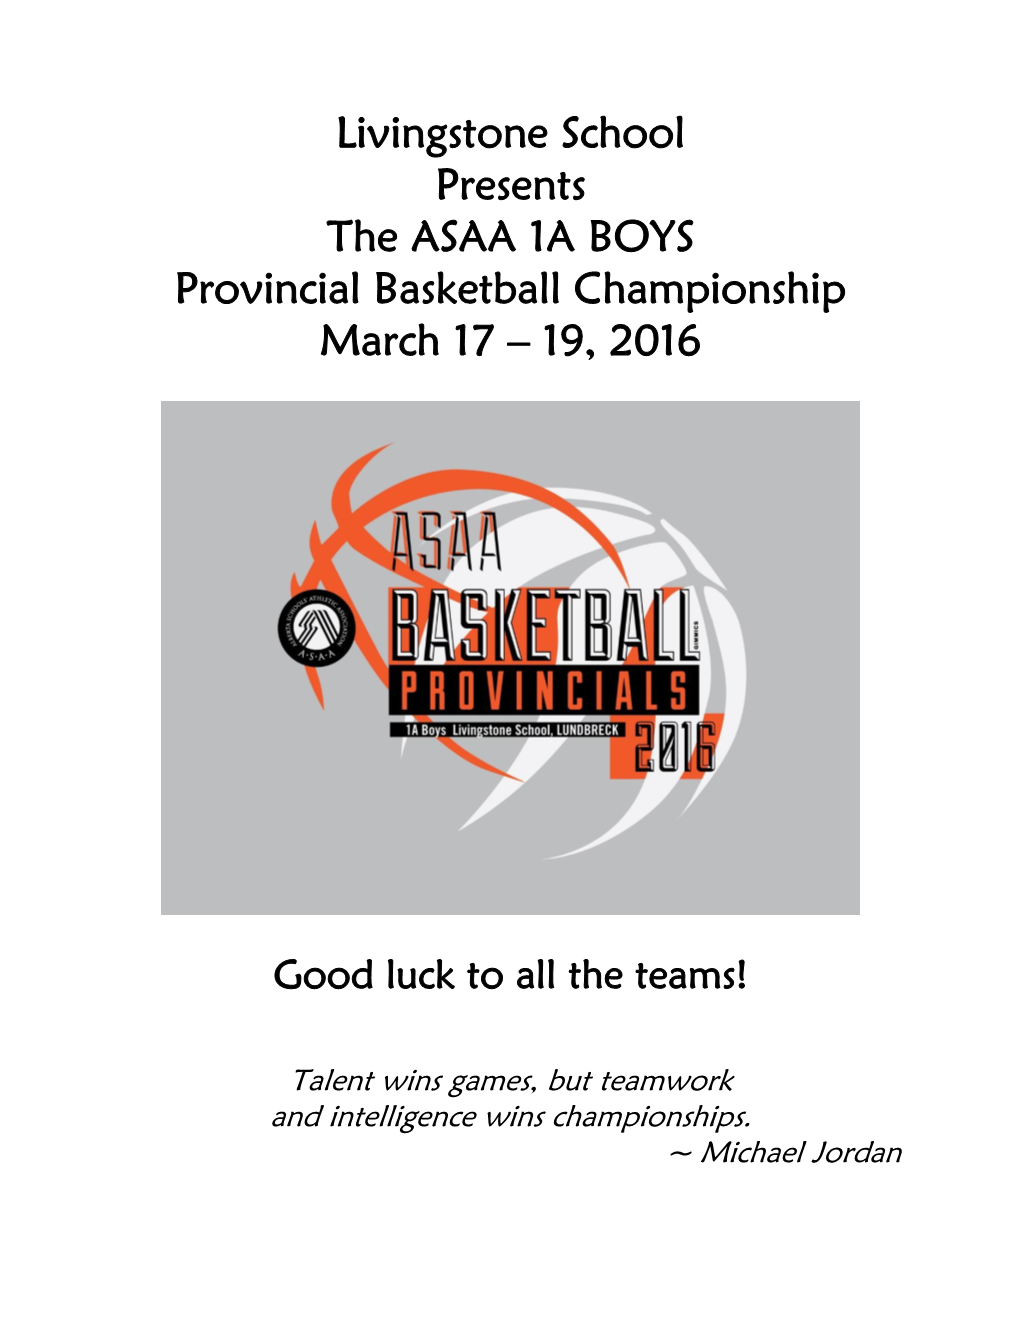 Livingstone School Presents the ASAA 1A BOYS Provincial Basketball Championship March 17 – 19, 2016